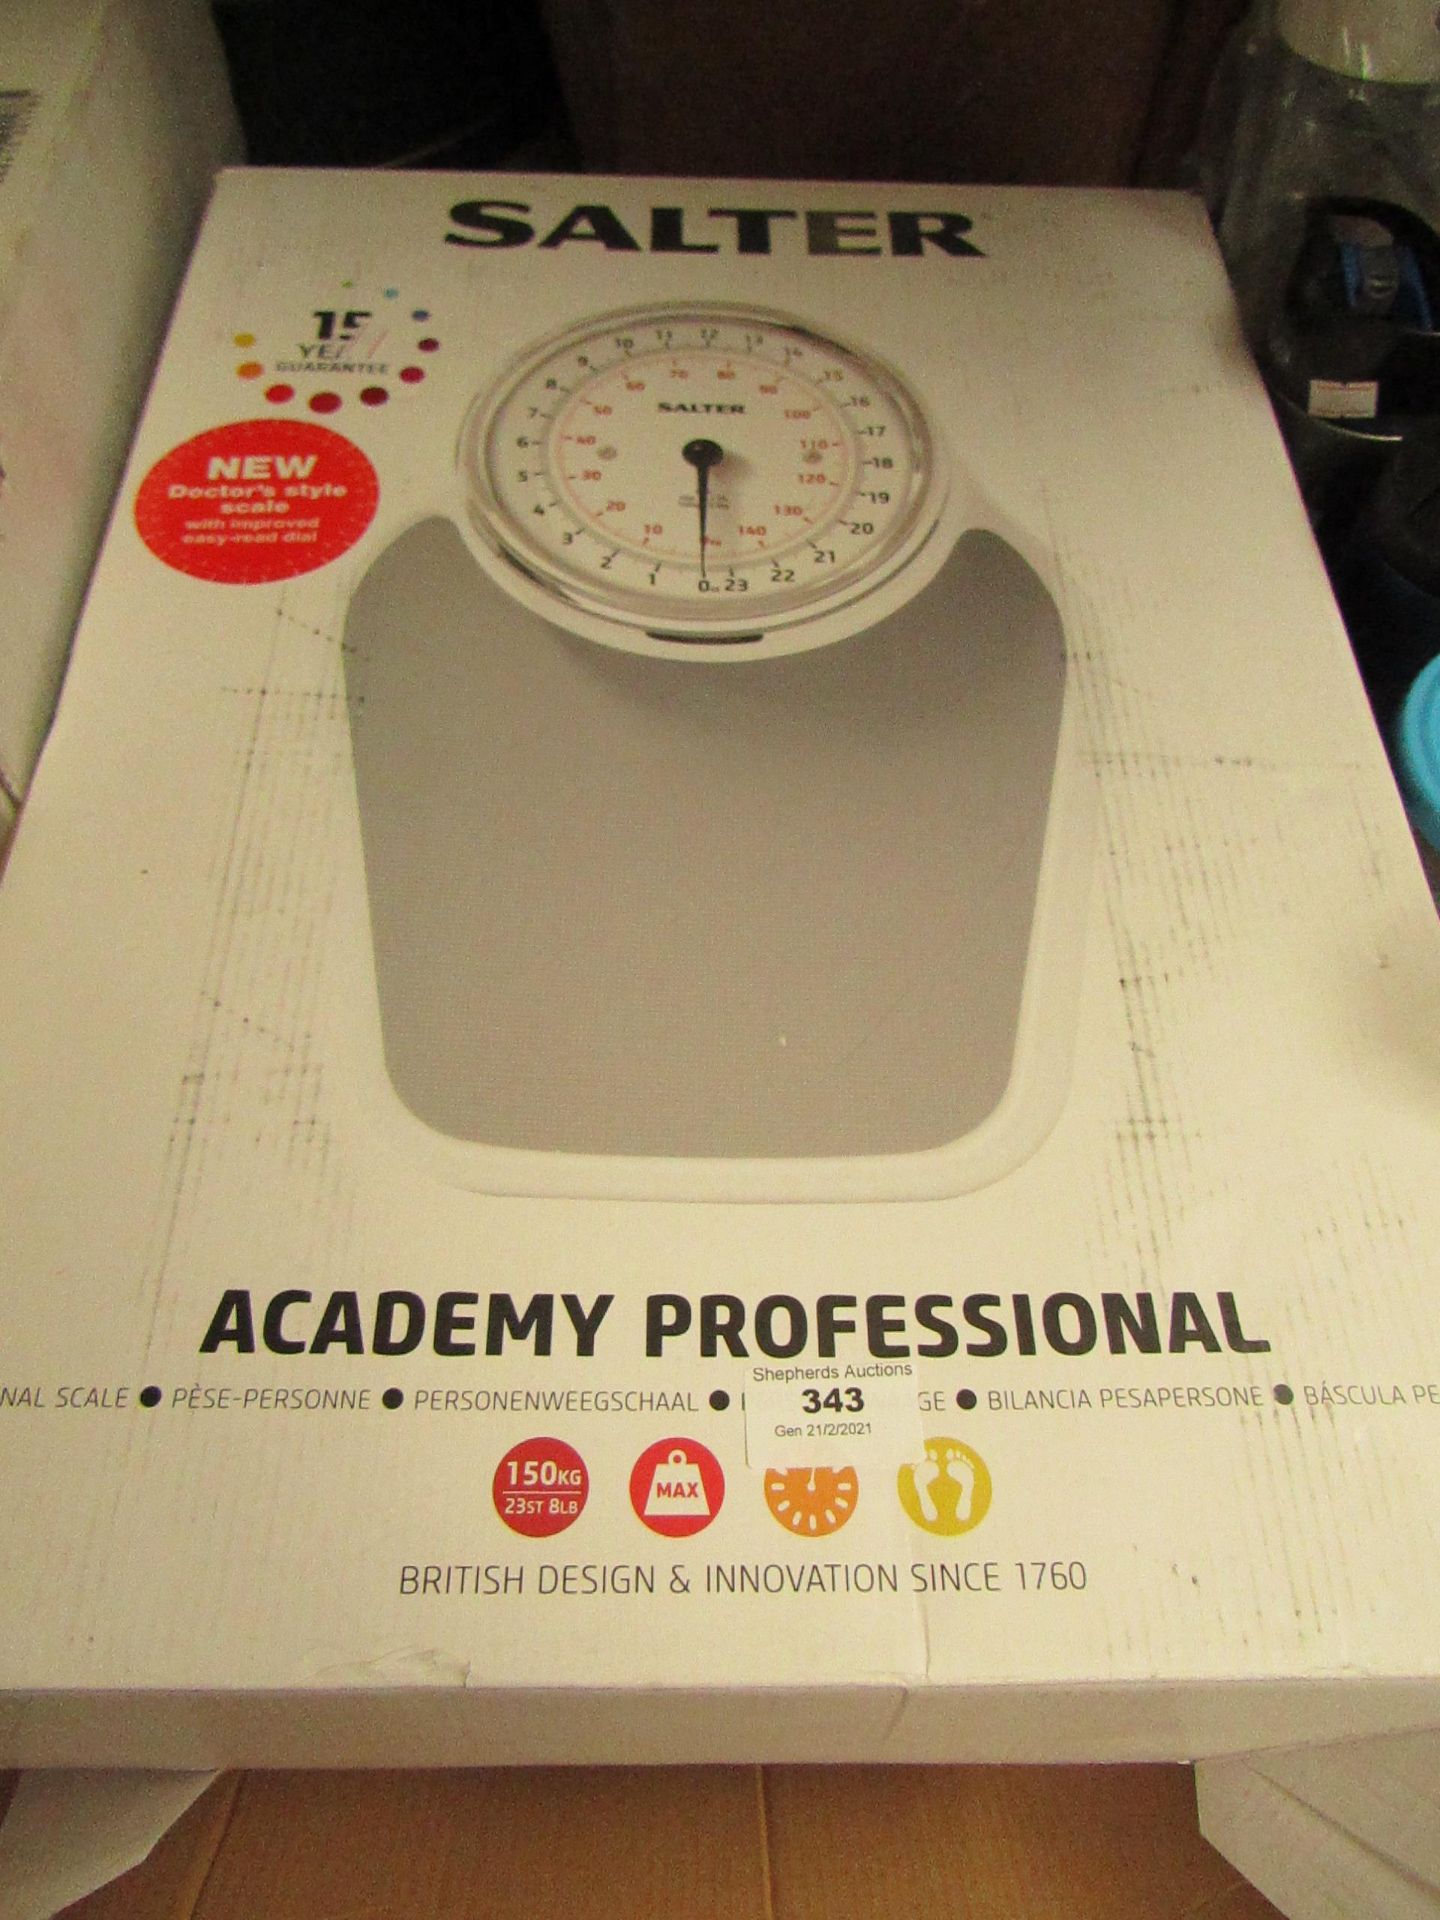 Salter Academy Professional Personal Scale - Boxed & Unchecked